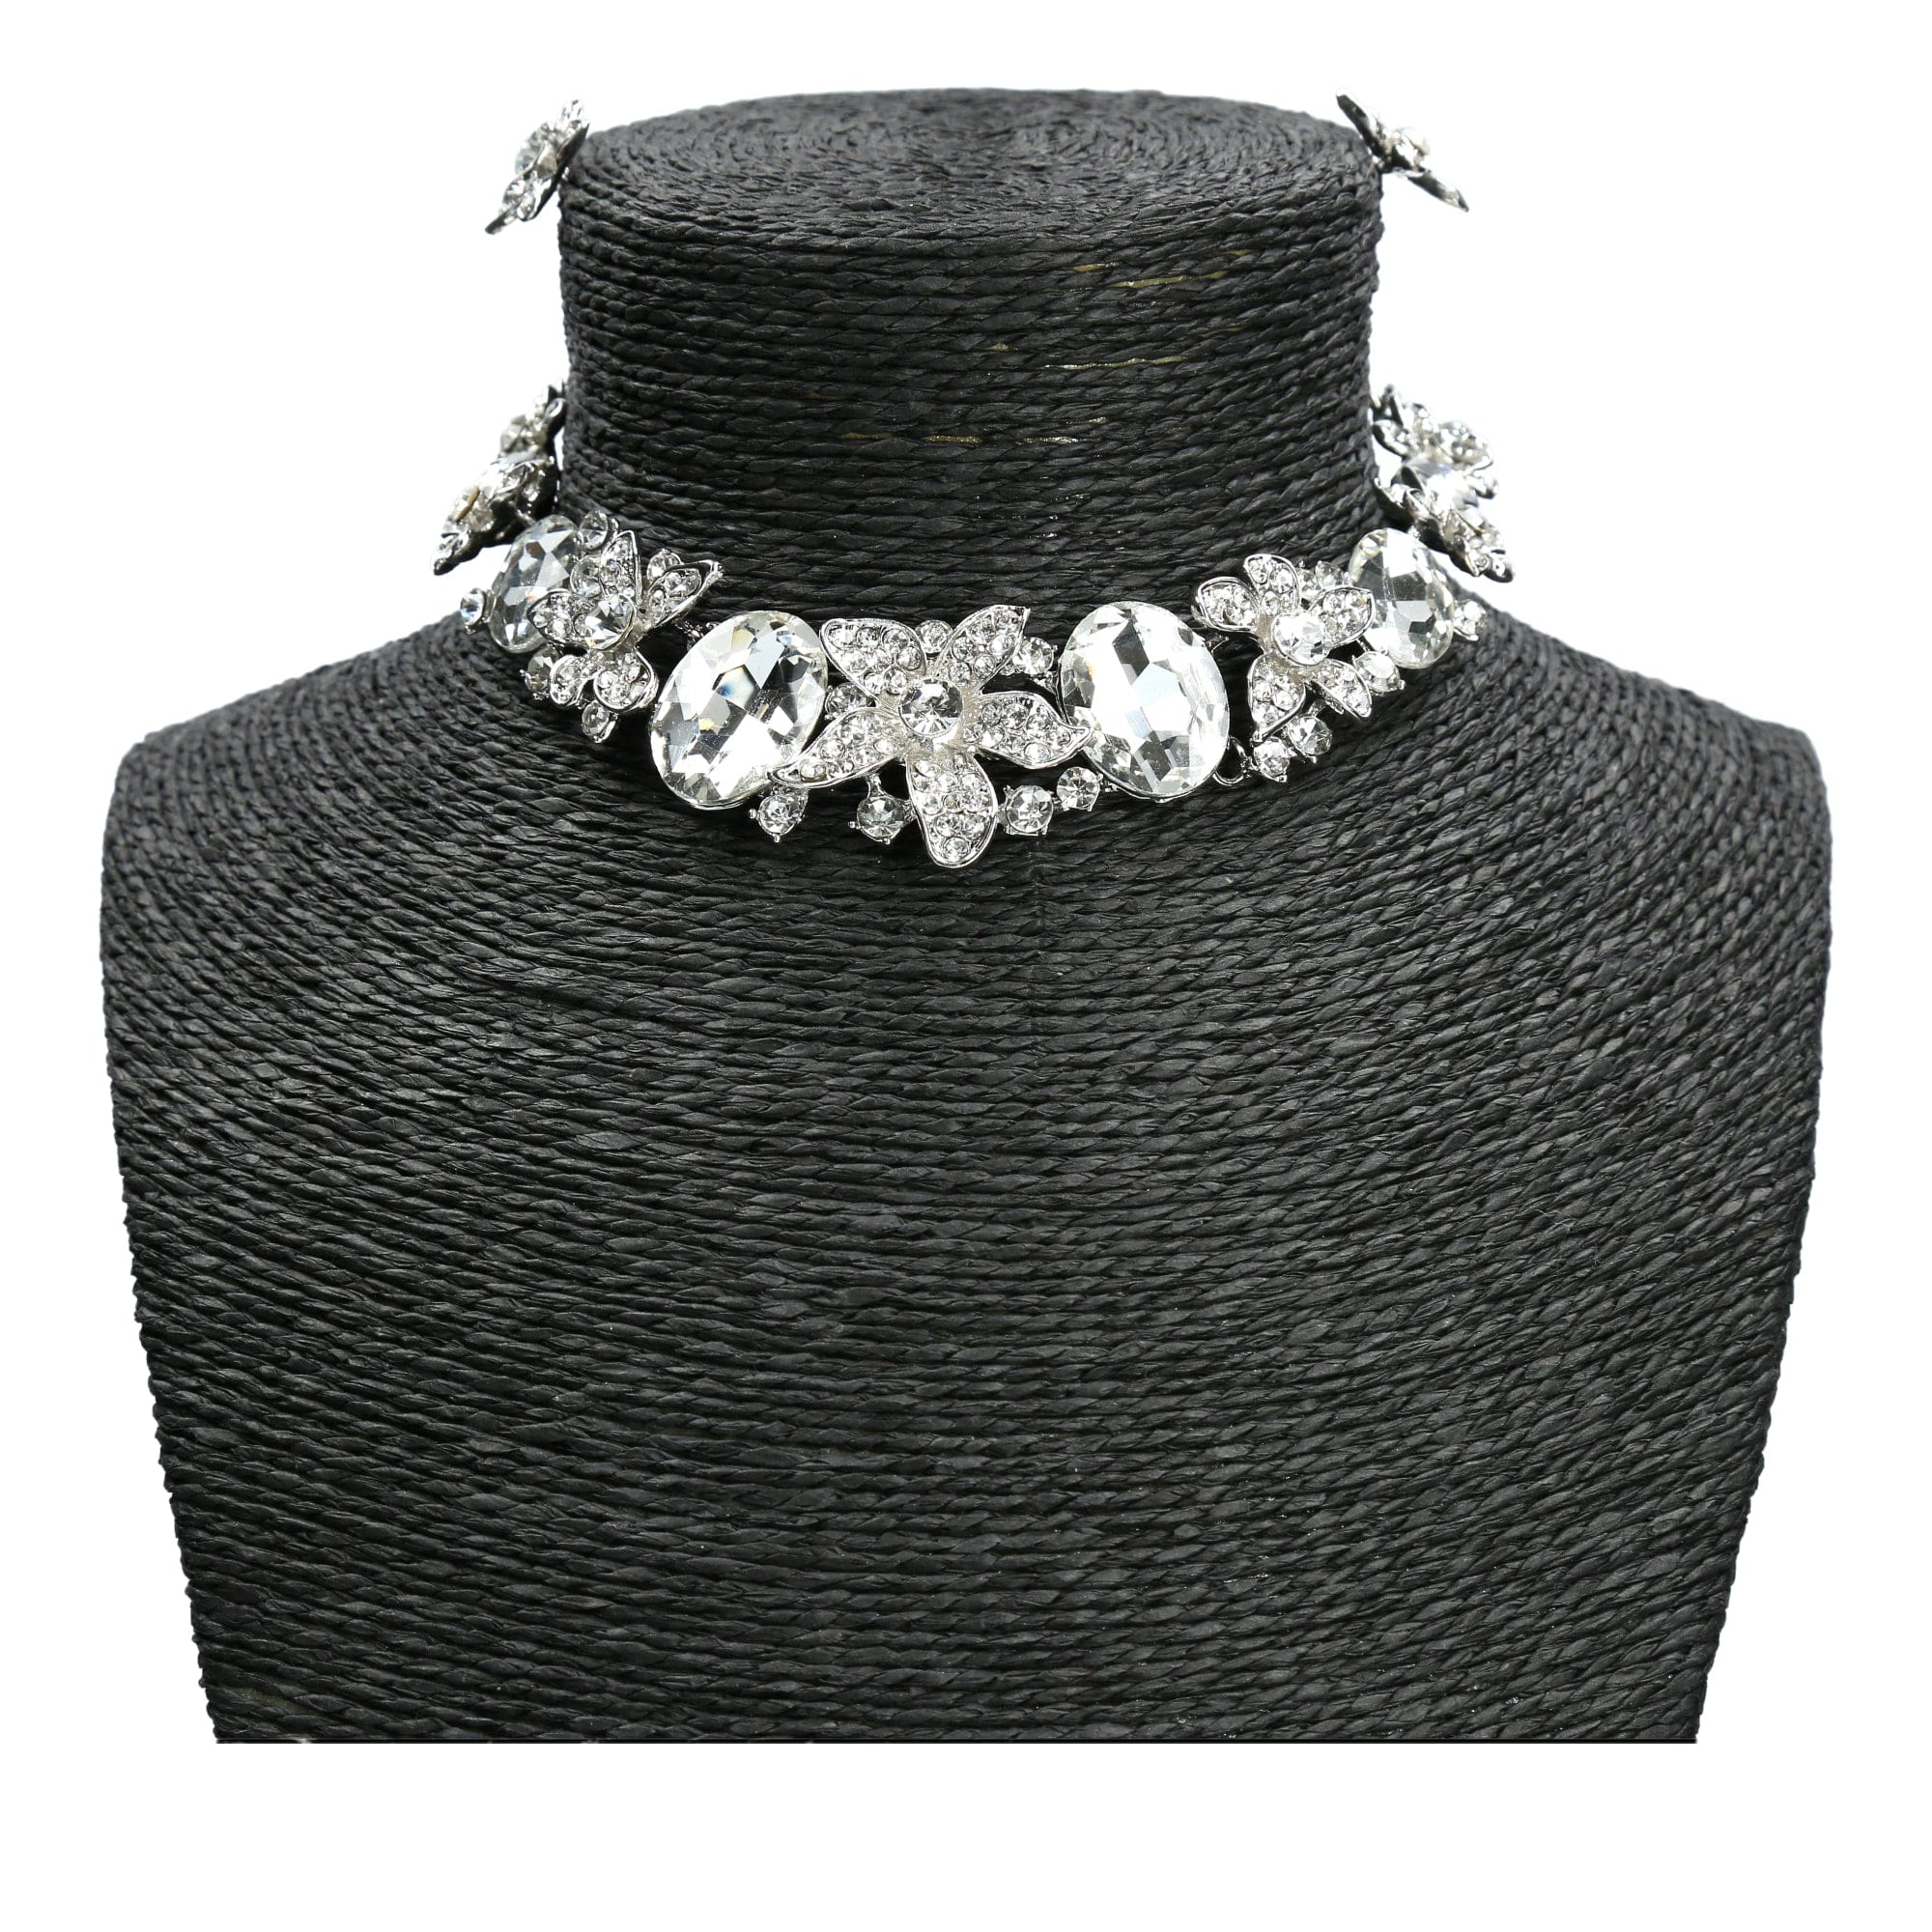 Charles jewelry set - Silver - Necklace